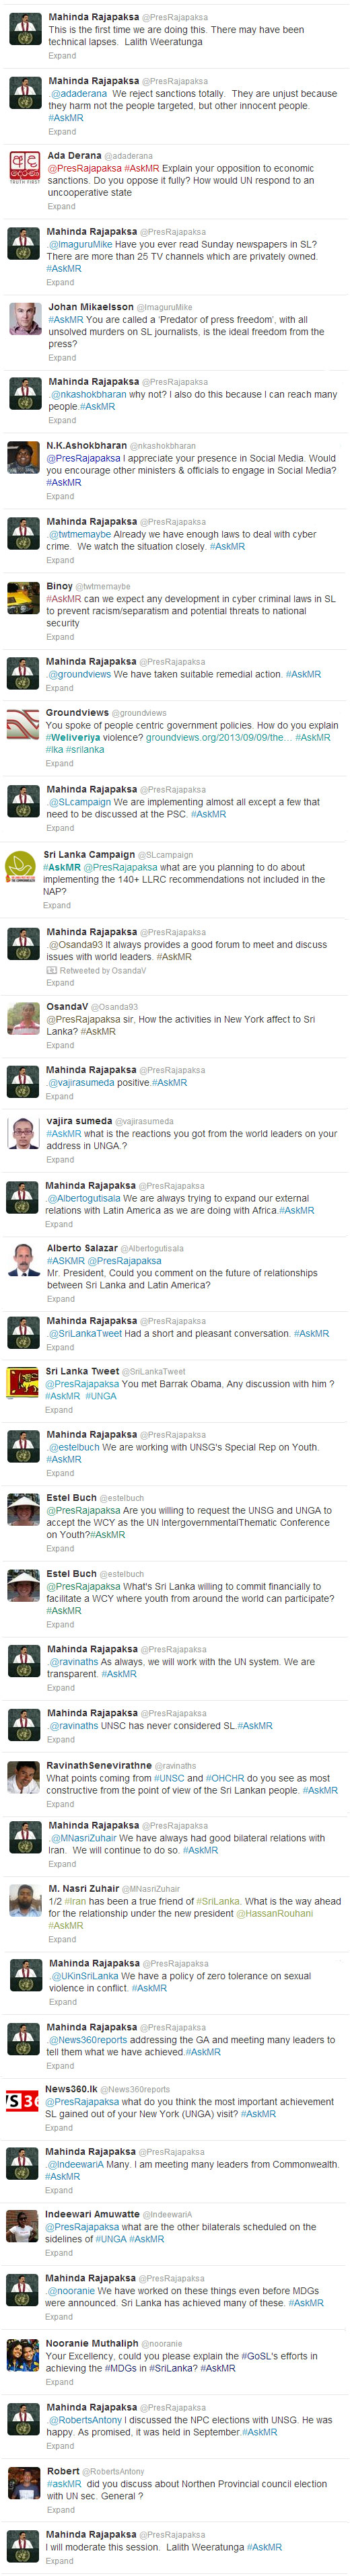 #AskMR Twitter Q&A with President Rajapaksa